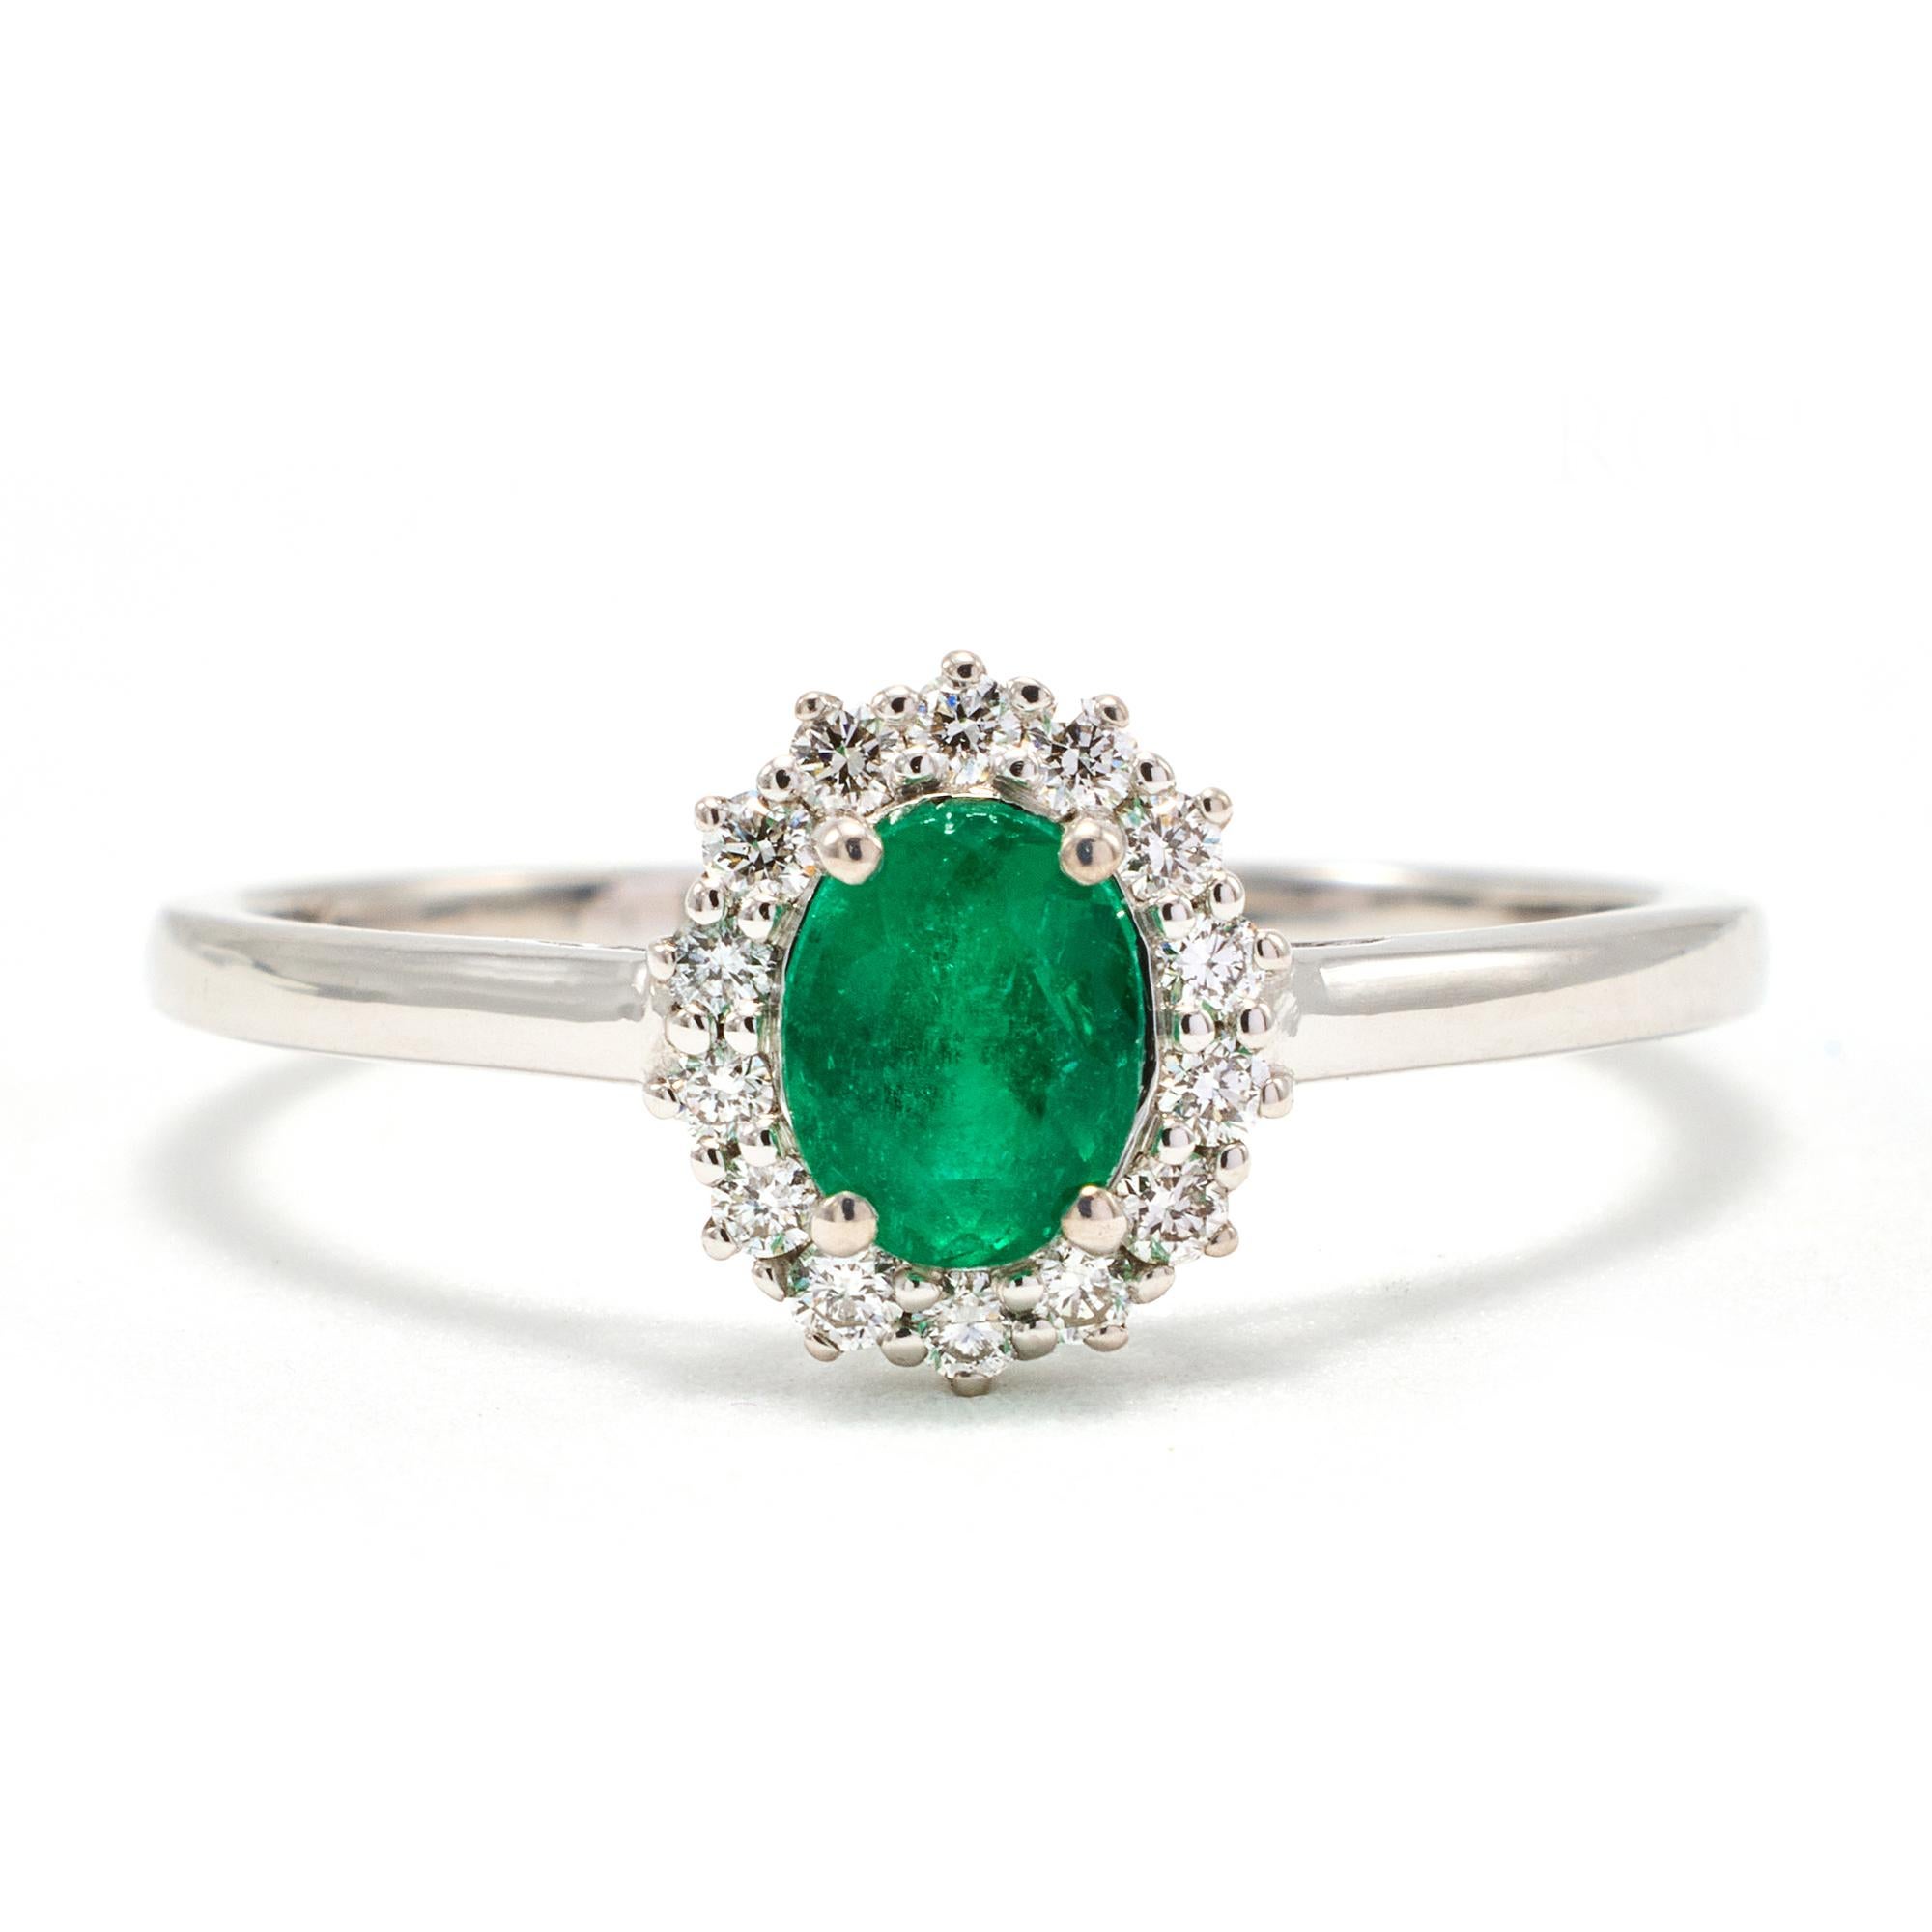 Genuine, natural Colombian Emerald Oval surrounded by Natural Diamonds set in 18k White Gold. Emerald Weight: 0.41 ct
Diamond Weight : 0.15ct. This natural Colombian emerald ring is a great fashion ring. Excellent for daily wear and versatile. The